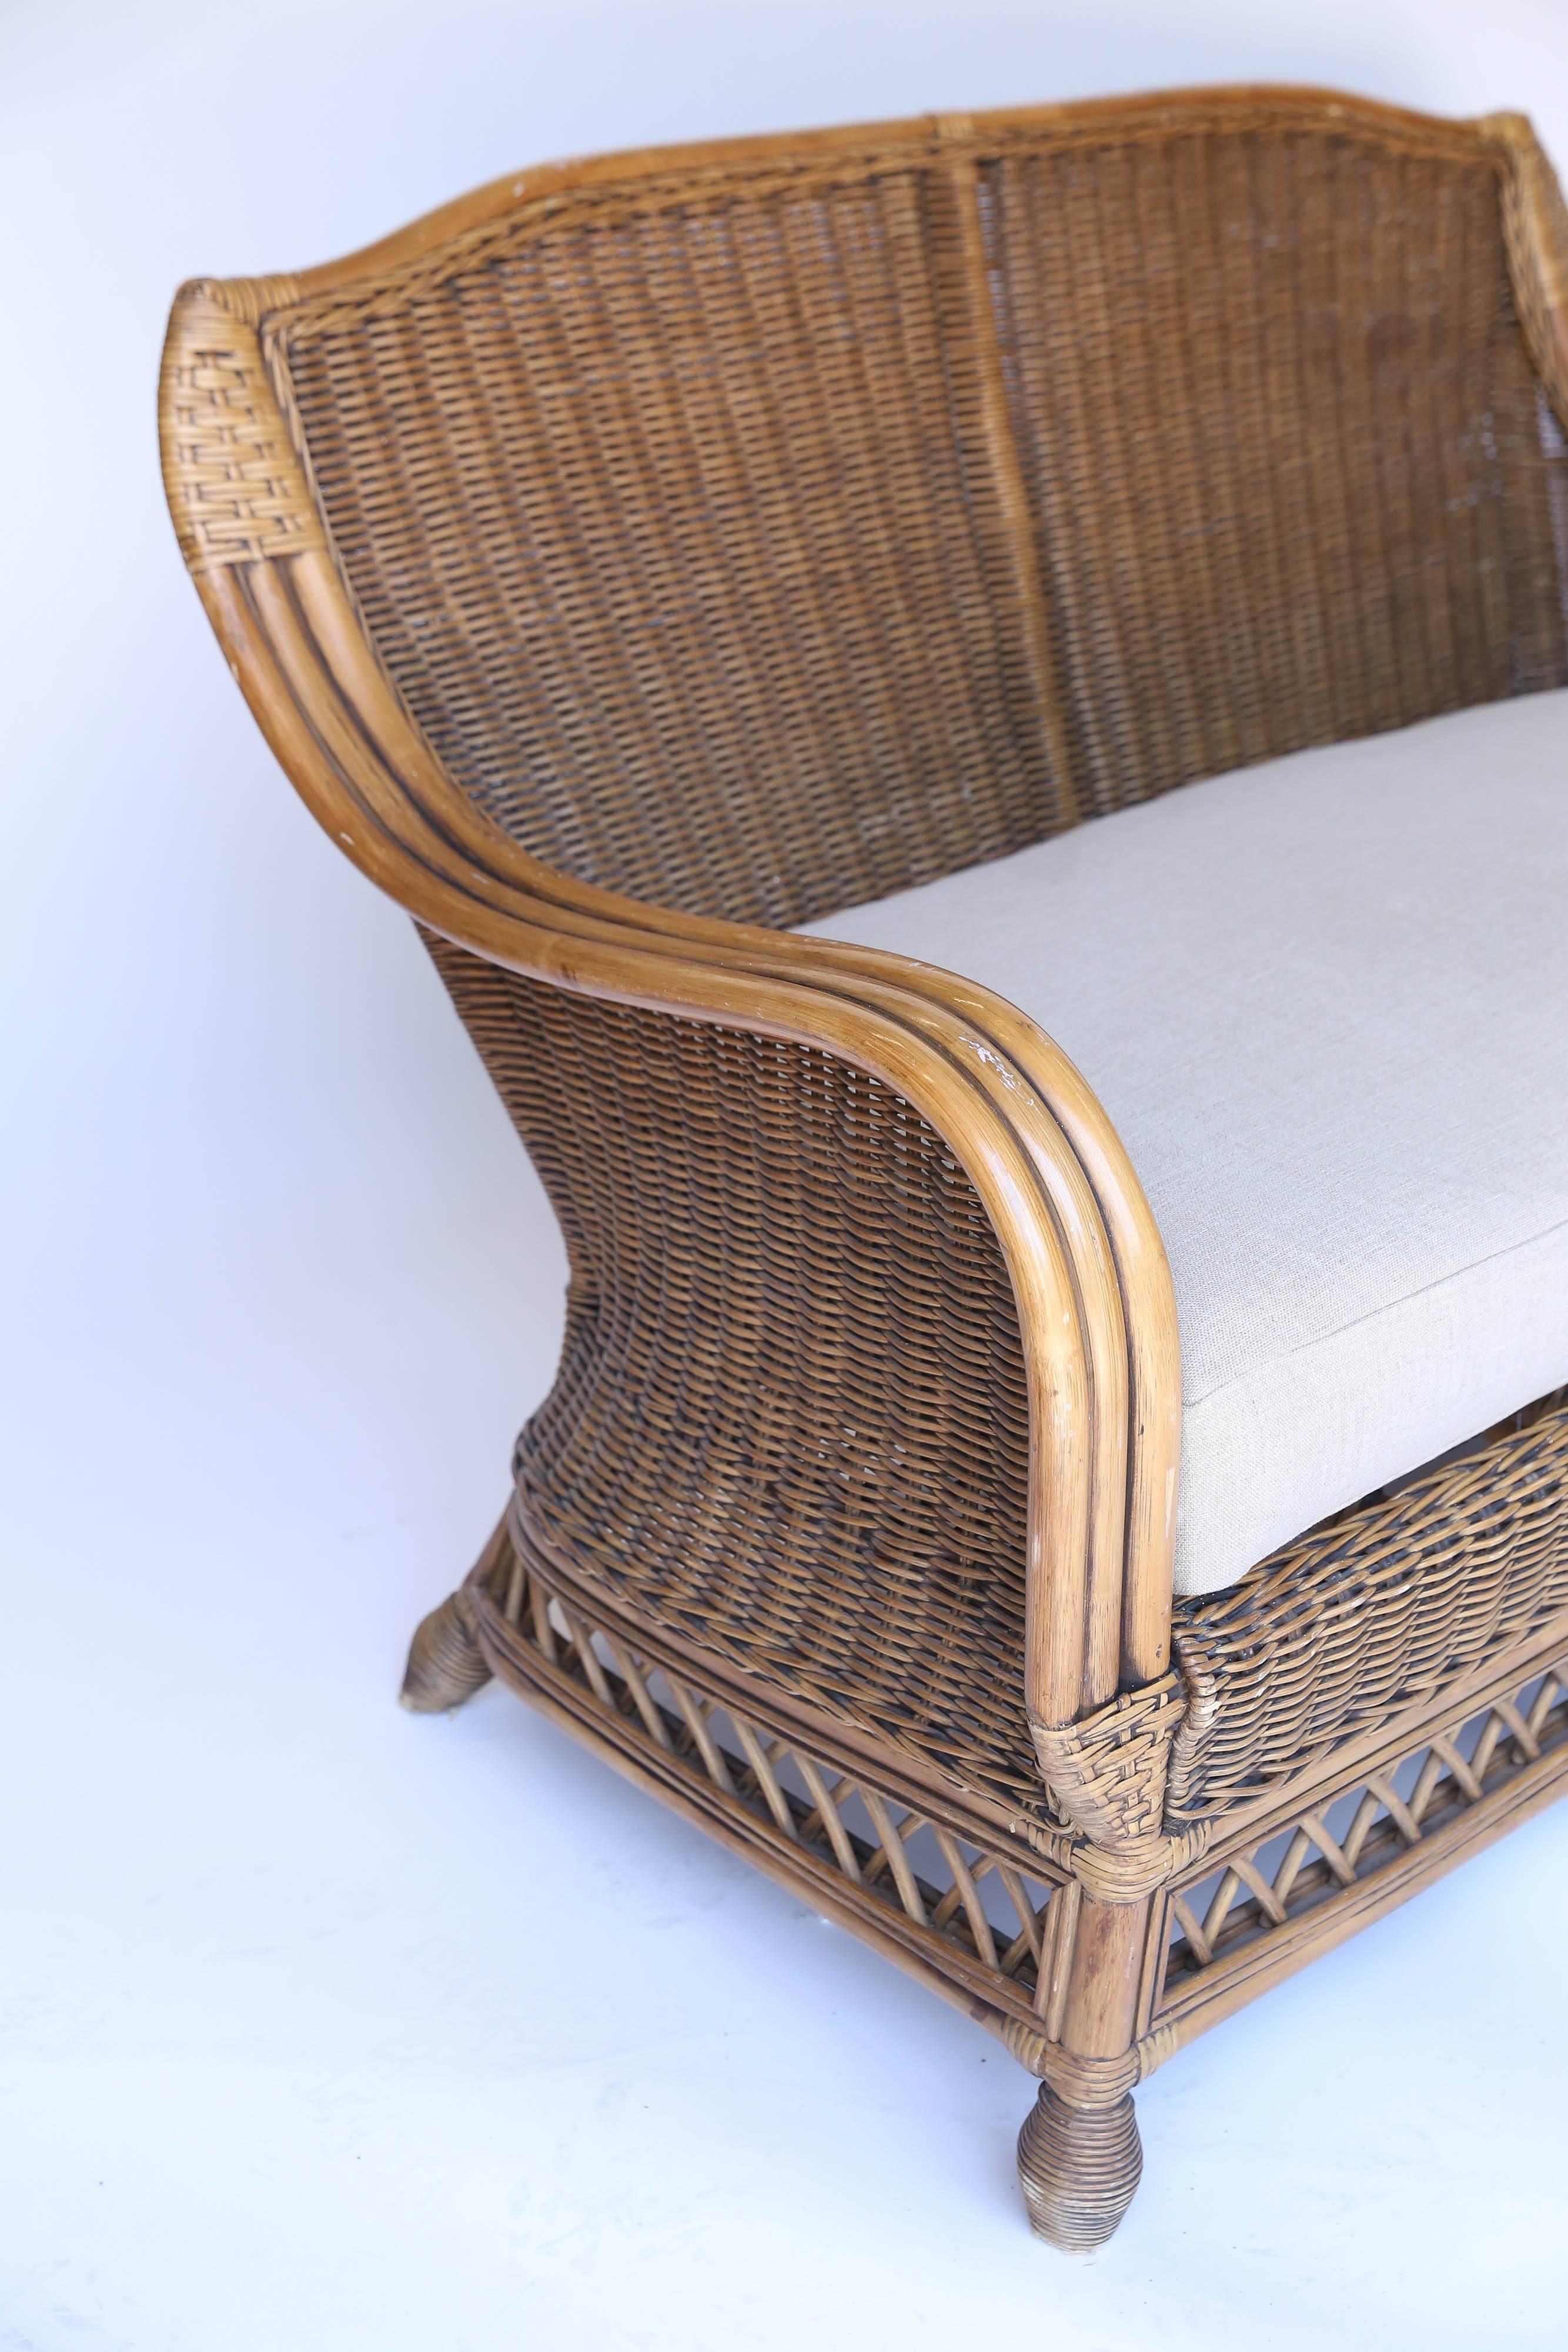 This vintage rattan settee is as comfortable as it is stylish. Placed in any setting, this is sure to make a memorable statement.